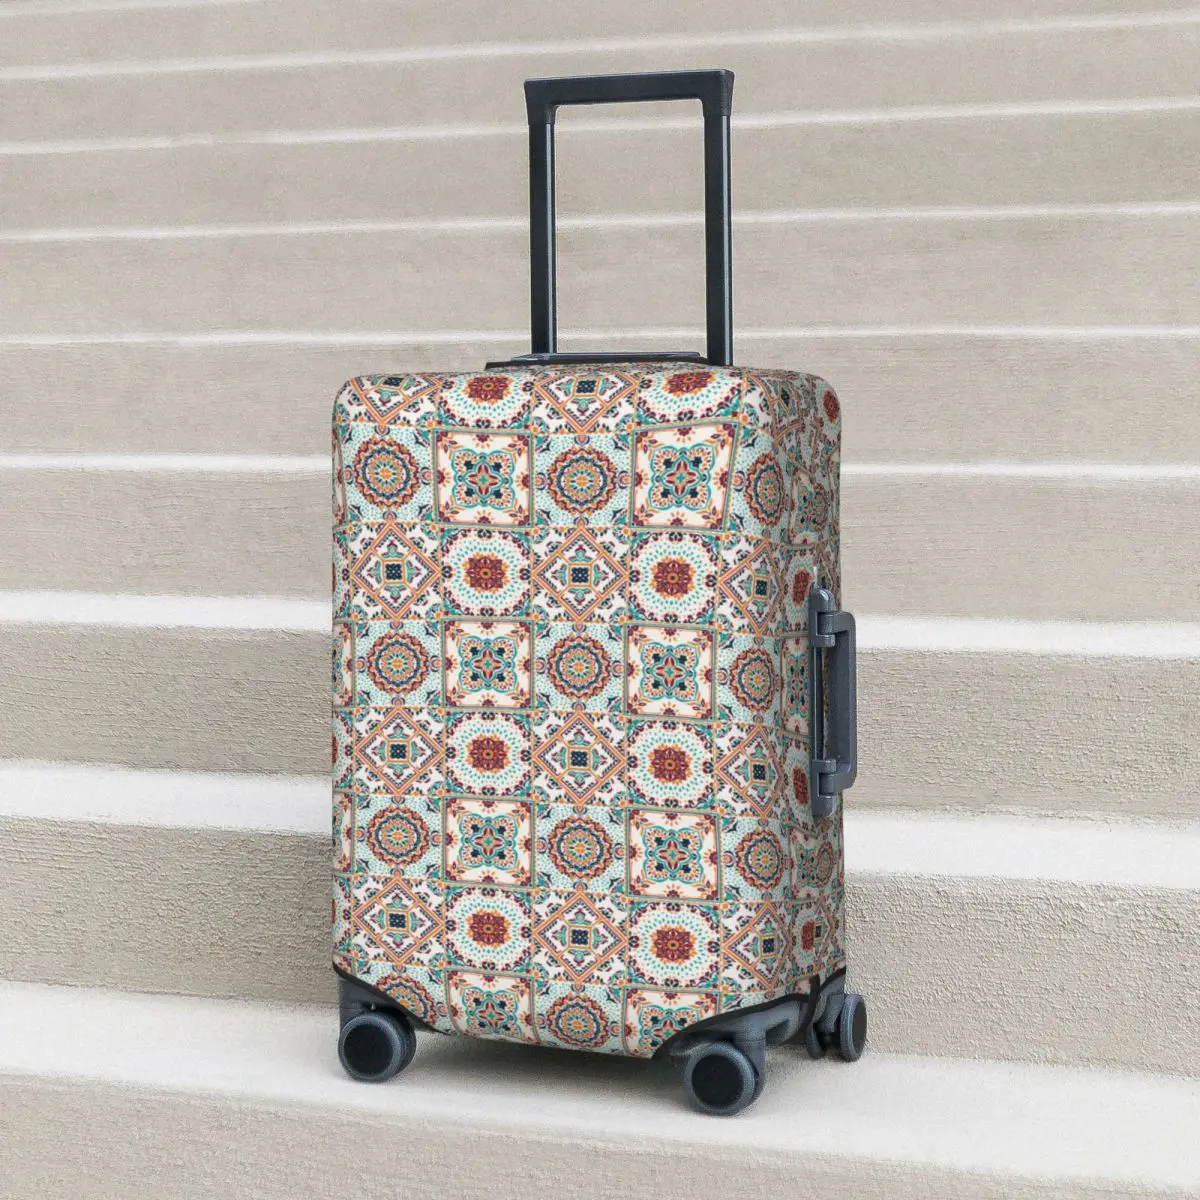 

Fashion Geometric Ethnic Suitcase Cover Dust Proof Bohemia Fun Business Protection Luggage Accesories Vacation Travel Essentials